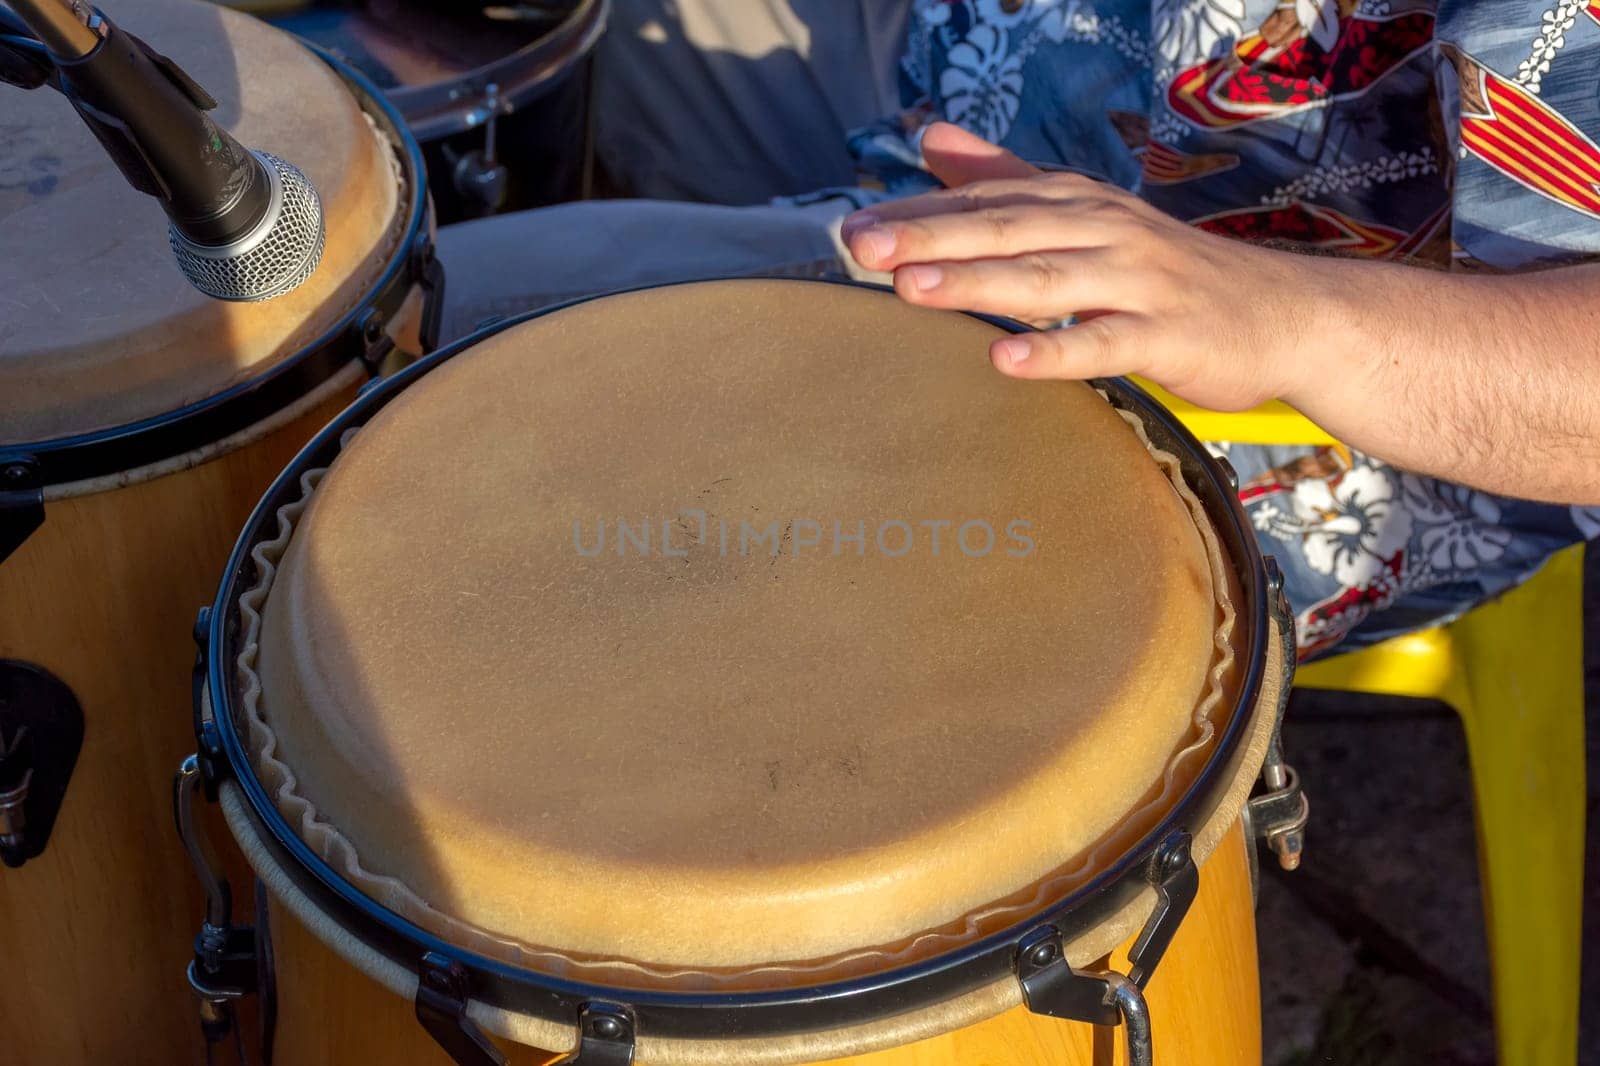 Detail of man playing atabaque during party at the carnival of the city of Belo Horizonte, Minas Gerais